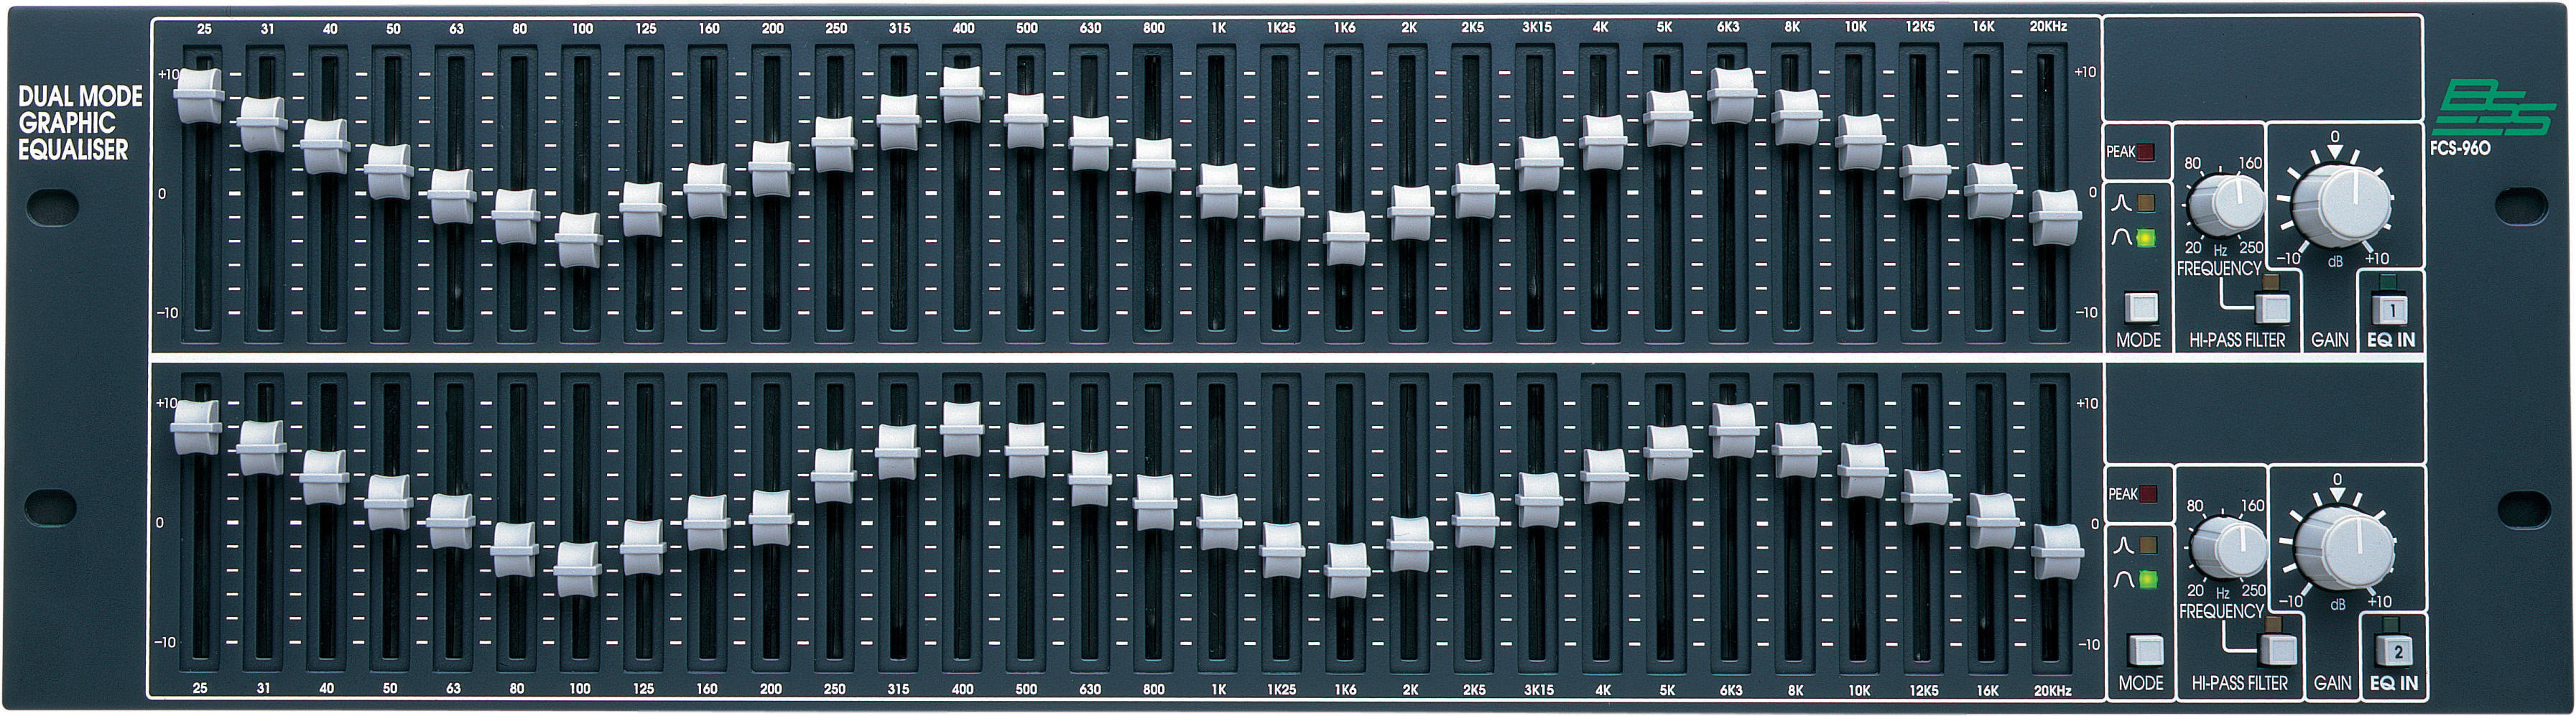 Graphic Equalizer Download For Mac